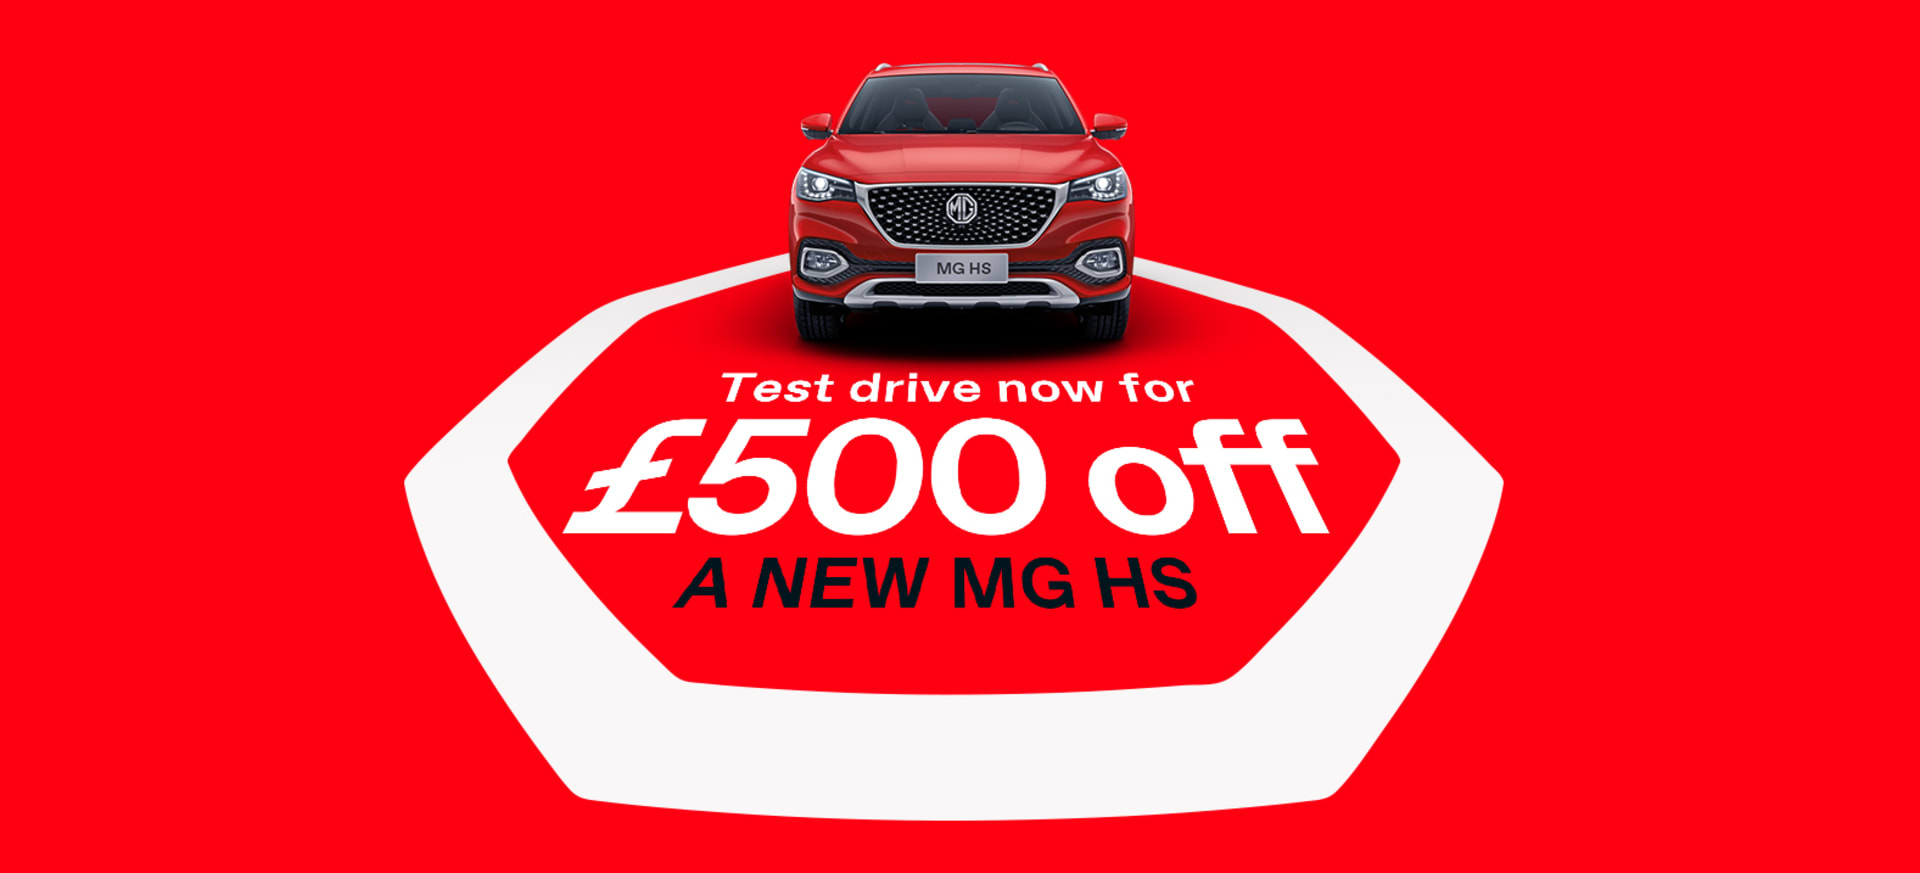 Test Drive a New MG HS and get £500 off at Park's